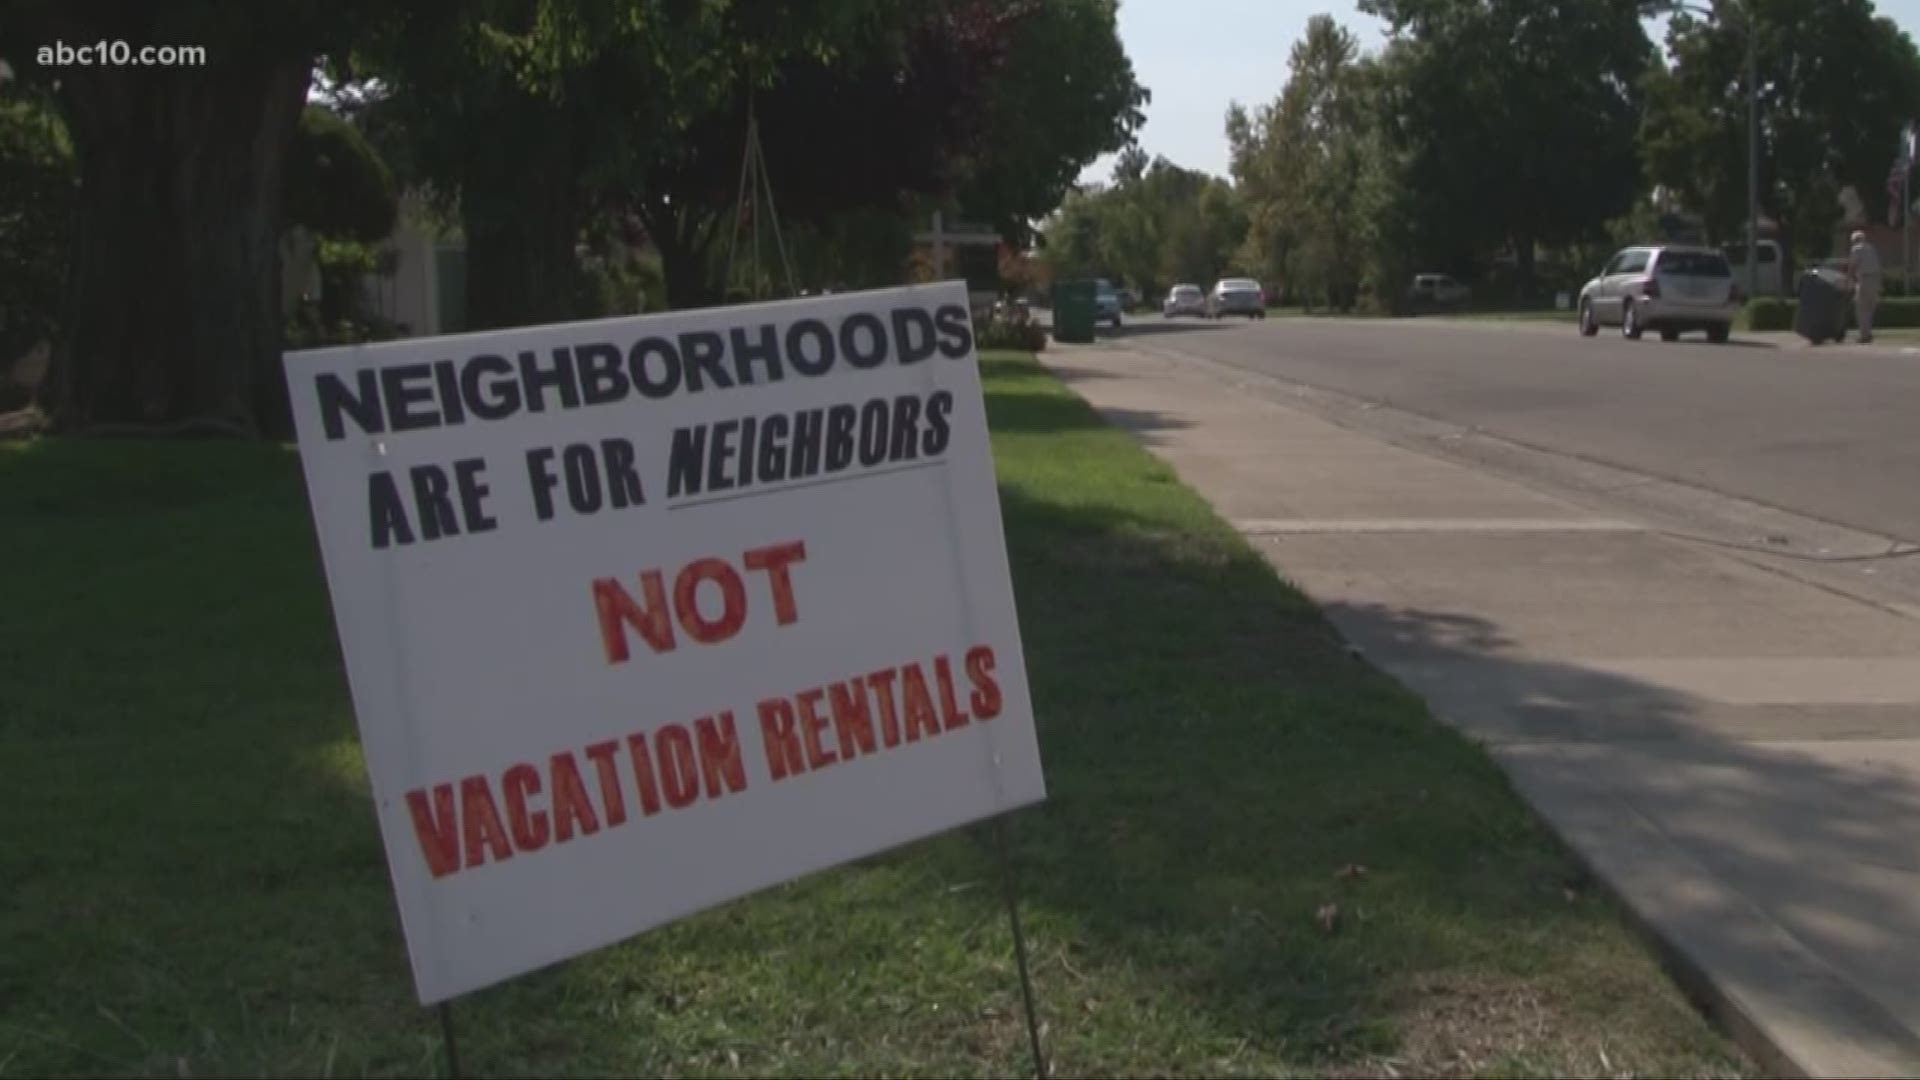 There are signs in front yards that read "Neighborhoods are for neighbors, not vacation rentals."